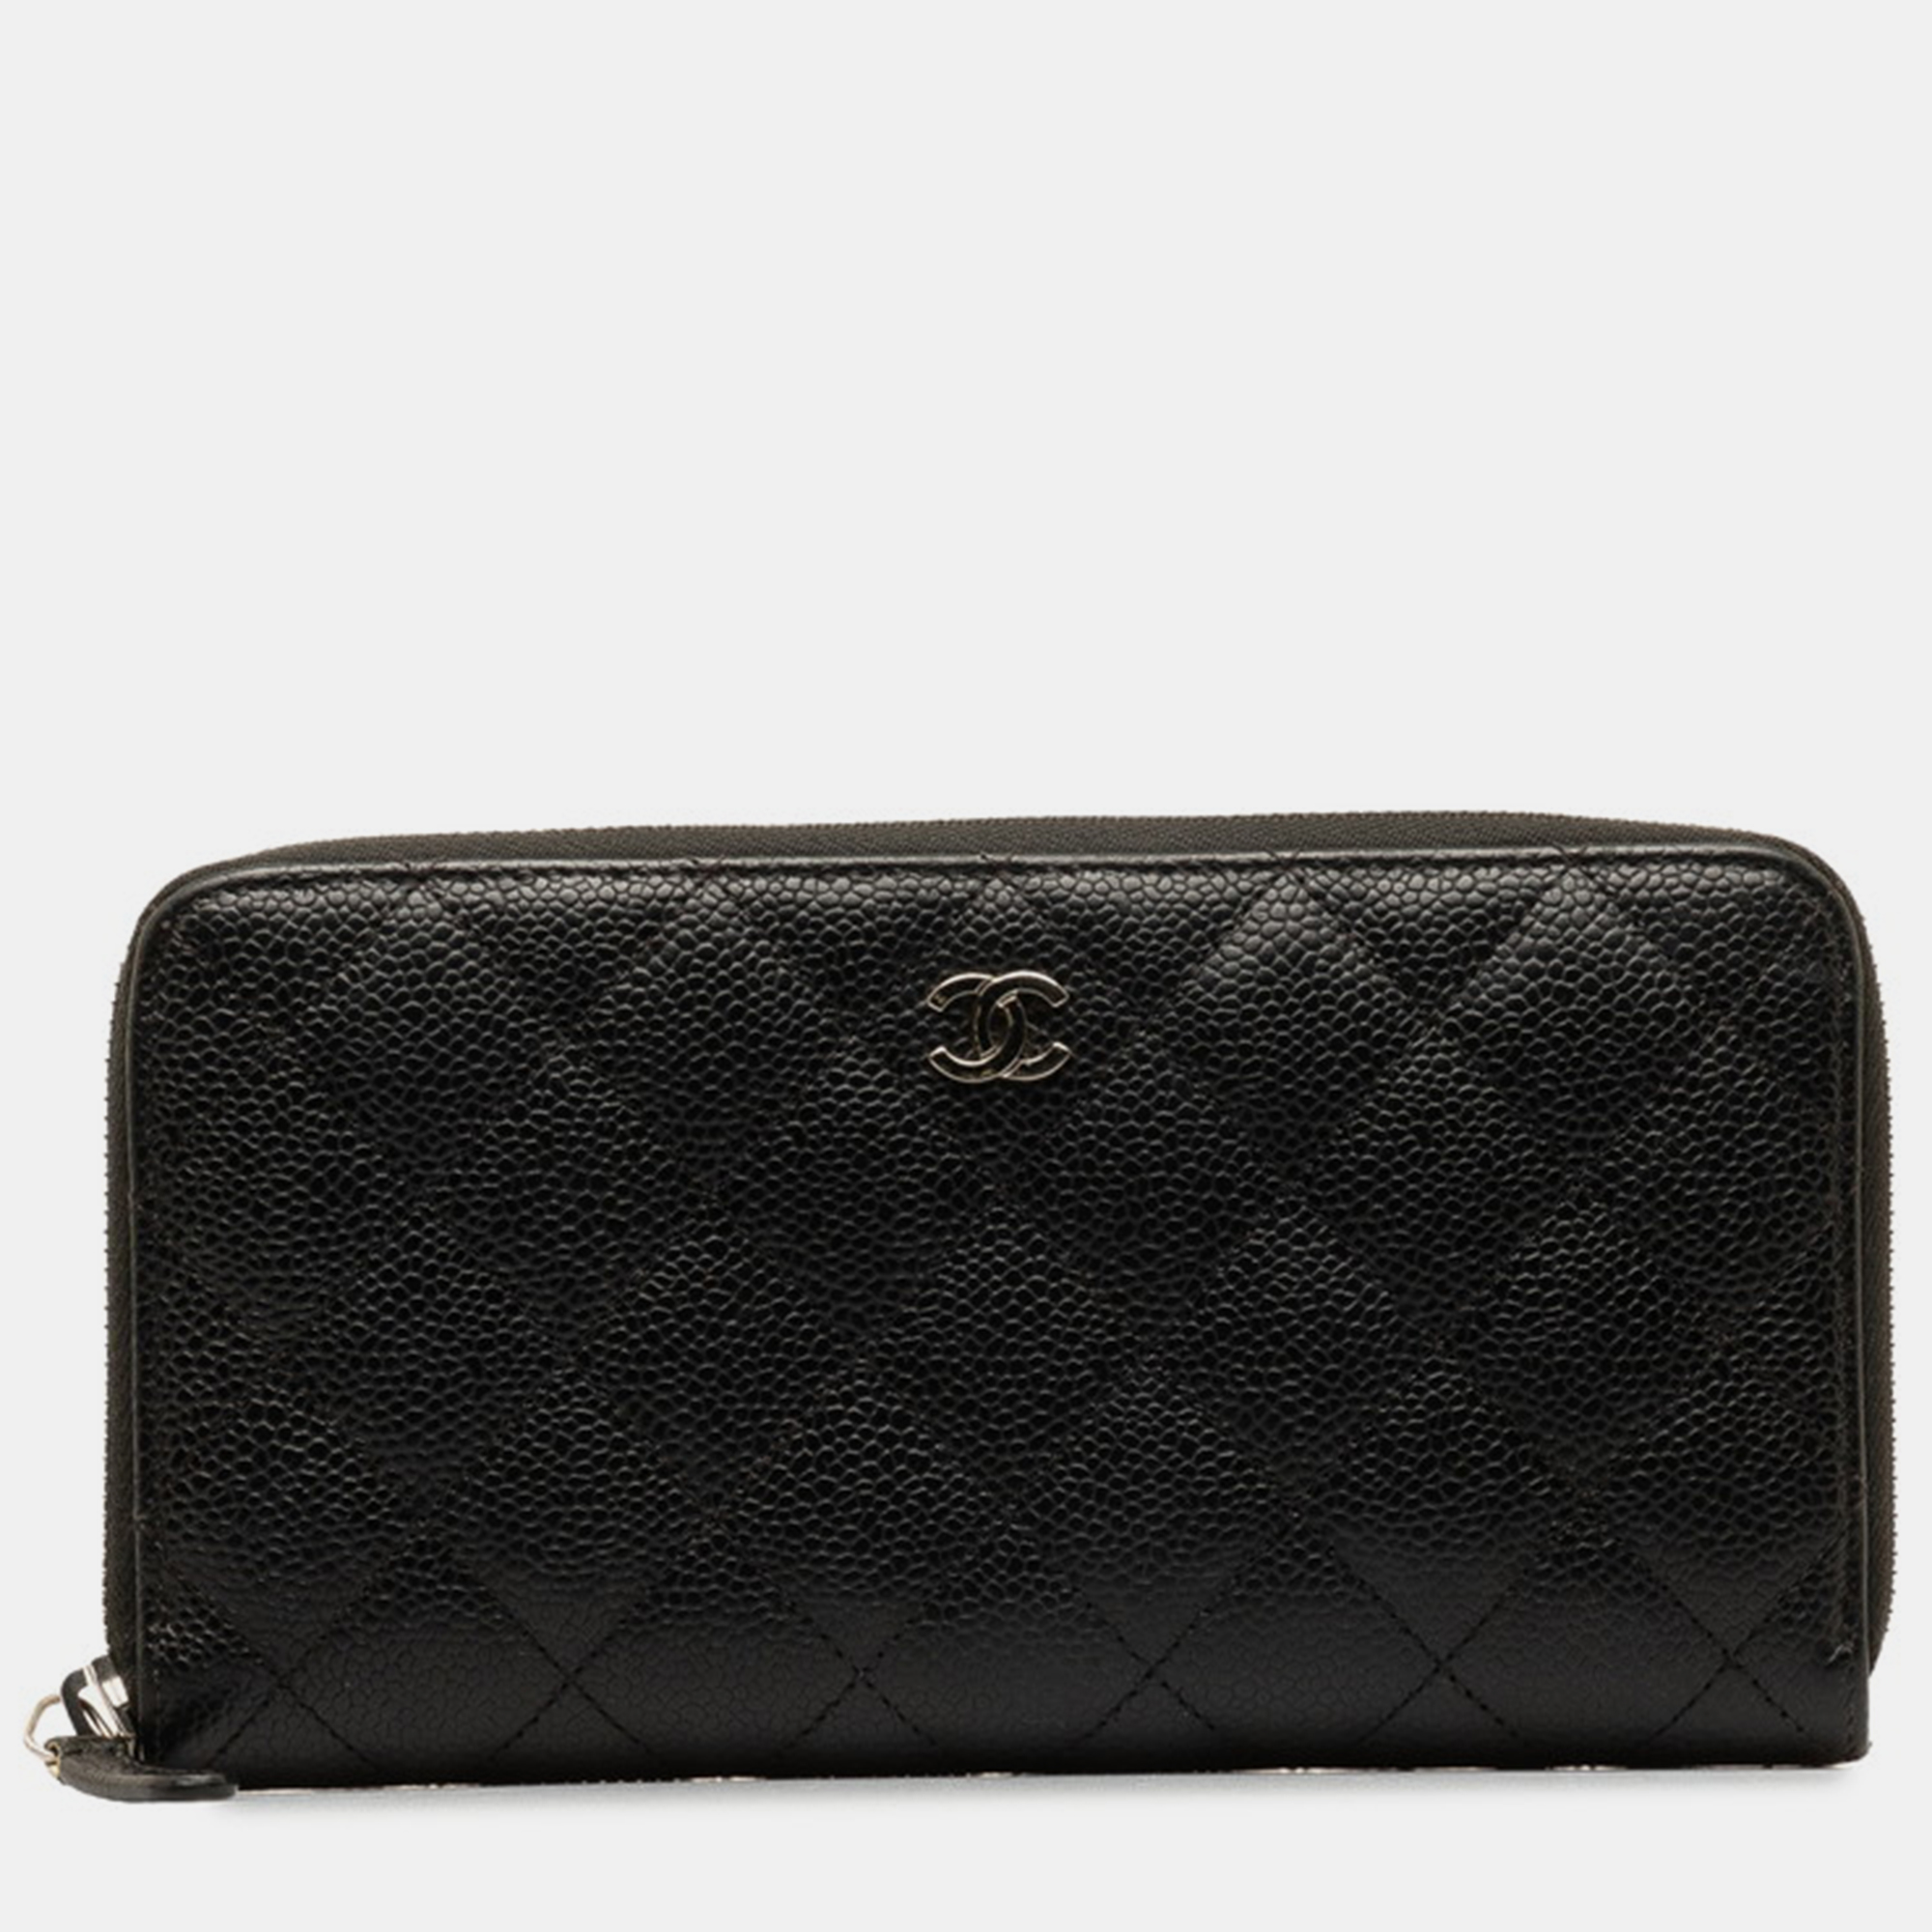 Chanel black leather quilted caviar zip around wallet